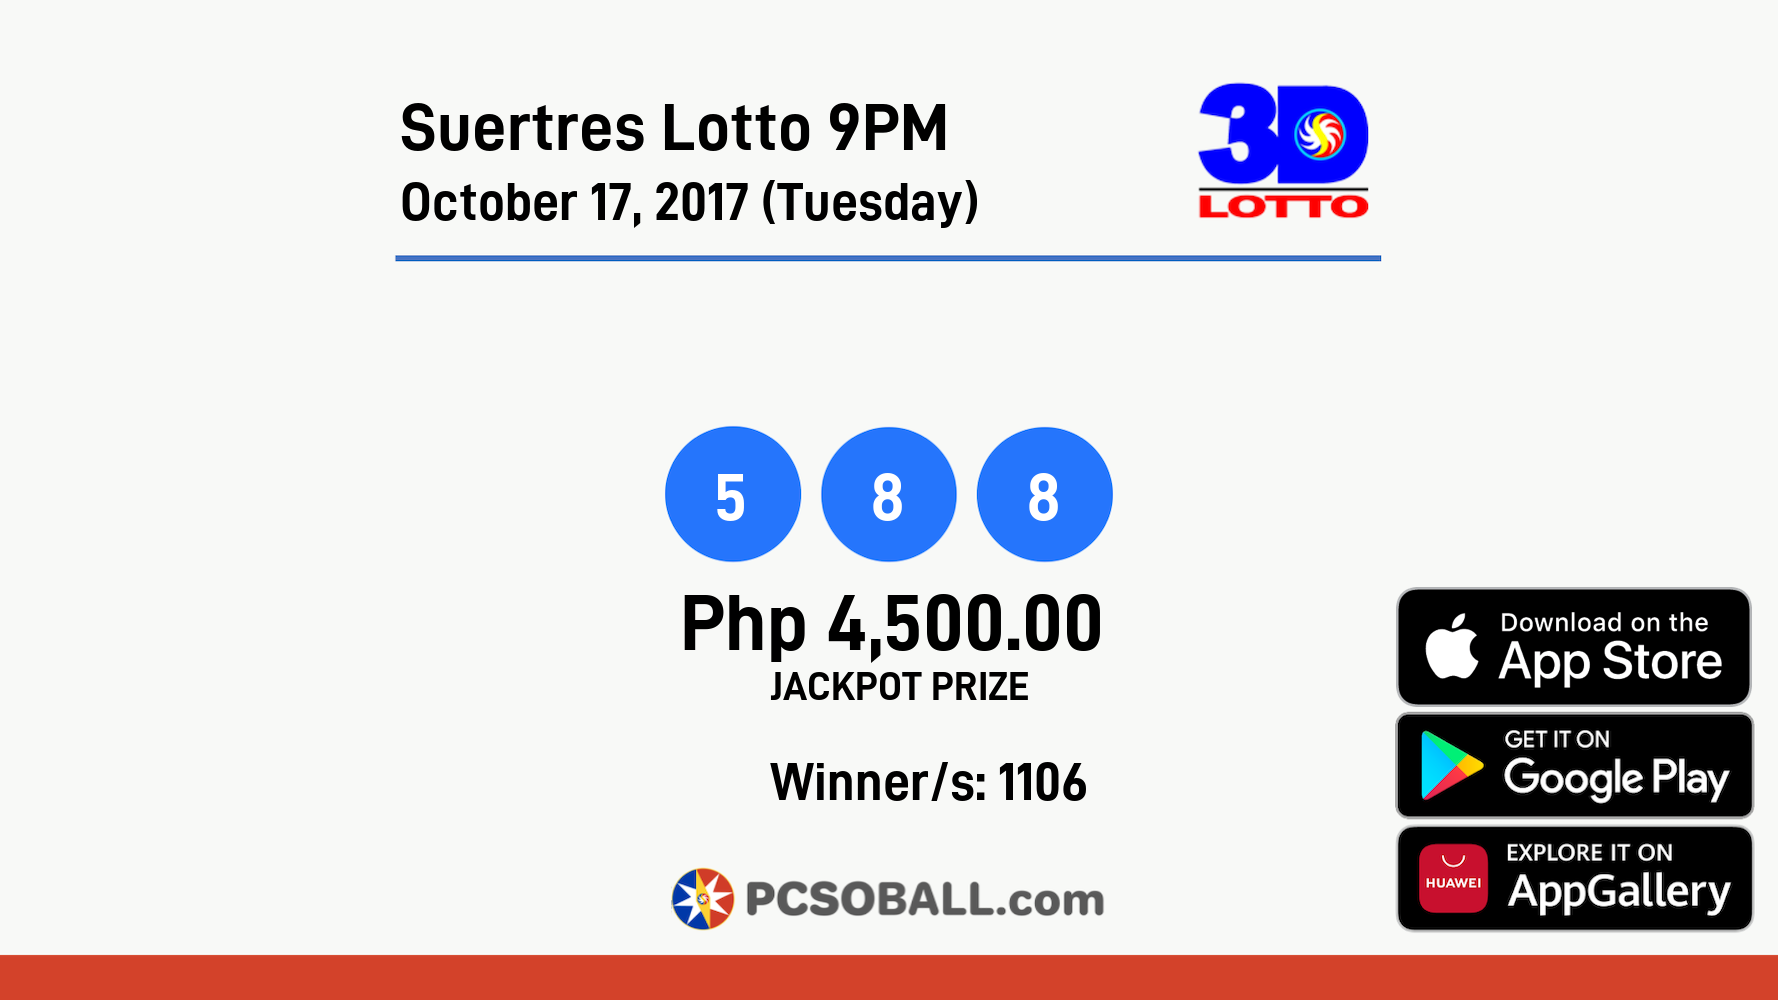 Suertres Lotto 9PM October 17, 2017 (Tuesday) Result